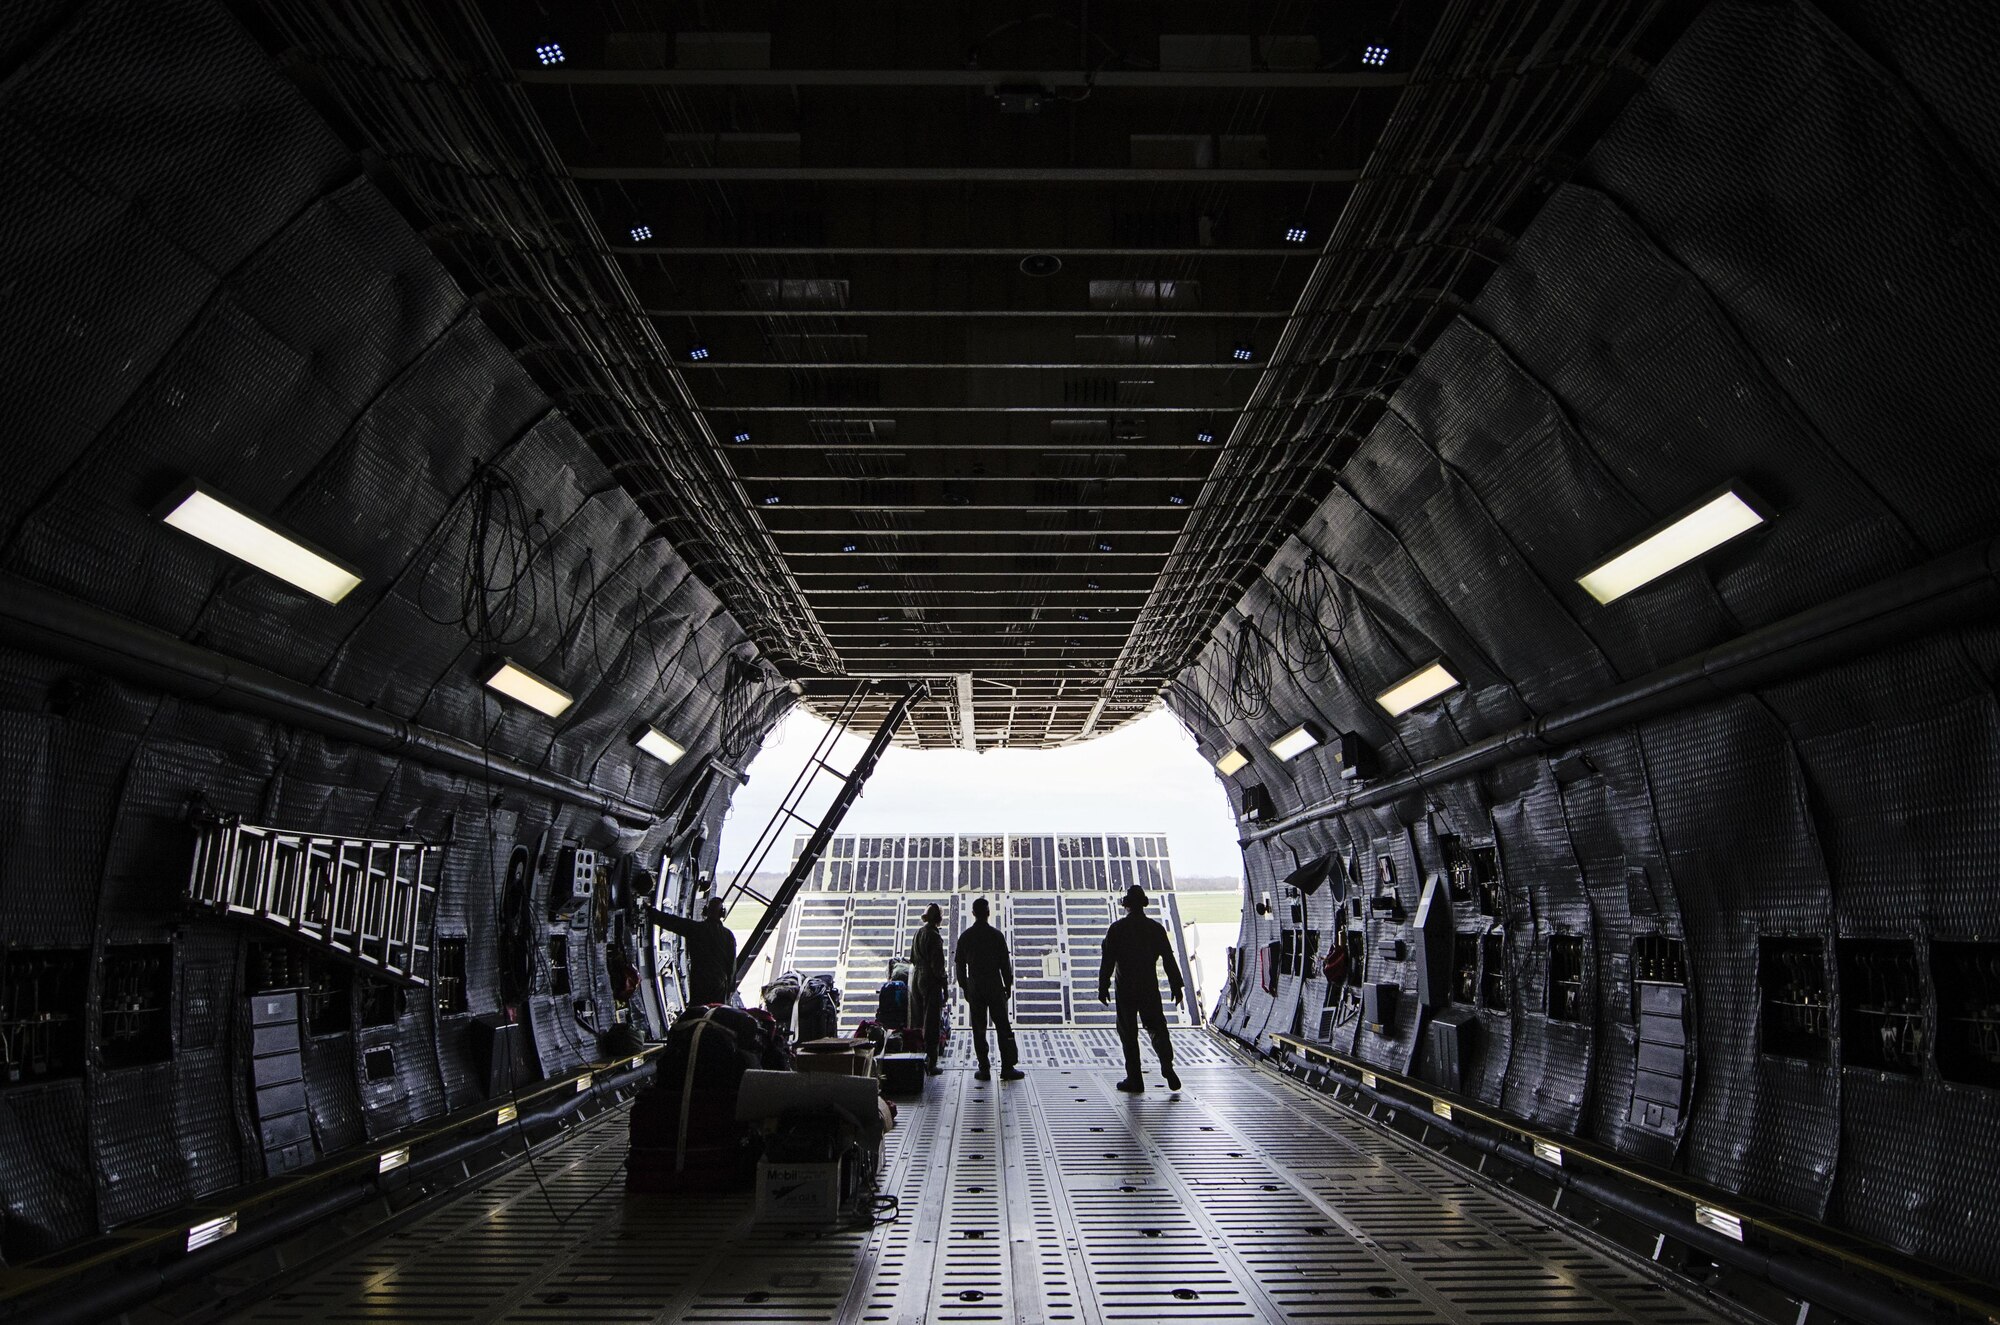 Reserve loadmasters from the 709th Airlift Squadron, Dover Air Force Base, Del., open the nose door of a C-5M Super Galaxy March 30, 2016, at Wright Patterson Air Force Base, Ohio, before loading equipment and flying to an off-station training exercise at Naval Air Station Pensacola, Fla. Dover reservists from 14 different career fields trained in mission readiness and combat related areas March 29 through April 3 to ensure they are current in all their deployment requirements. (U.S. Air Force photo/Capt. Bernie Kale)